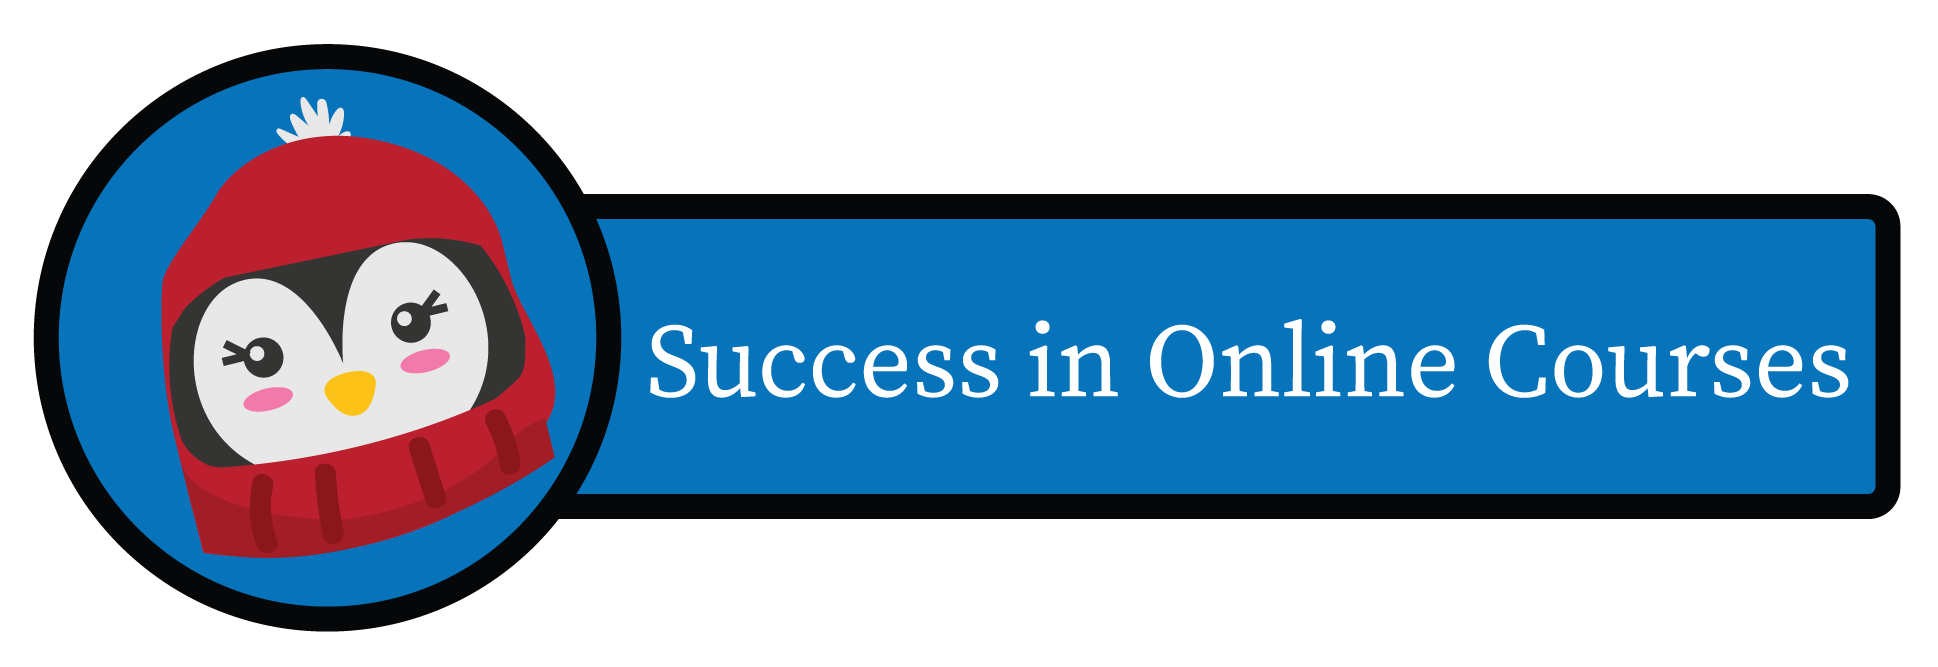 Success in Online Courses